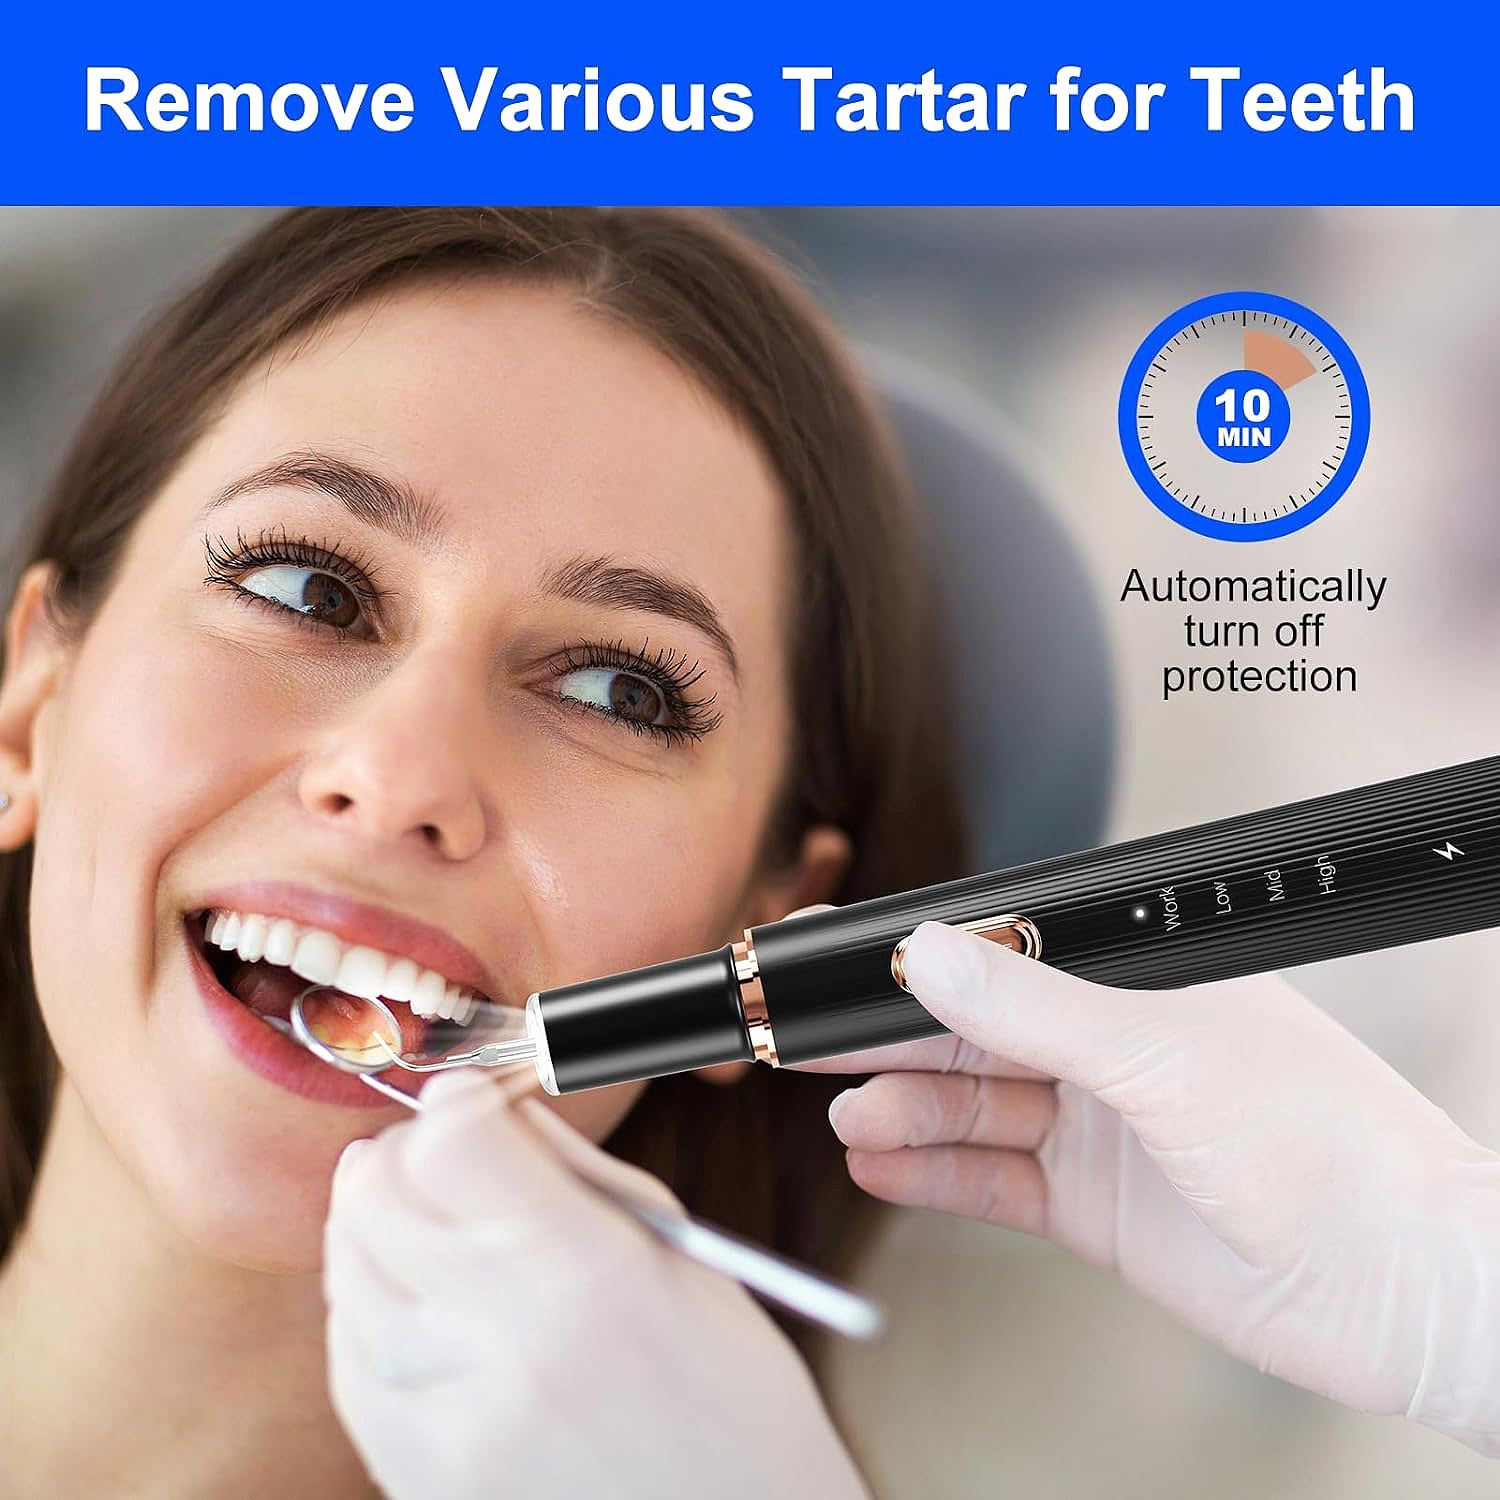  FAIRYLOVE KWJ-103 Plaque Remover for Teeth 